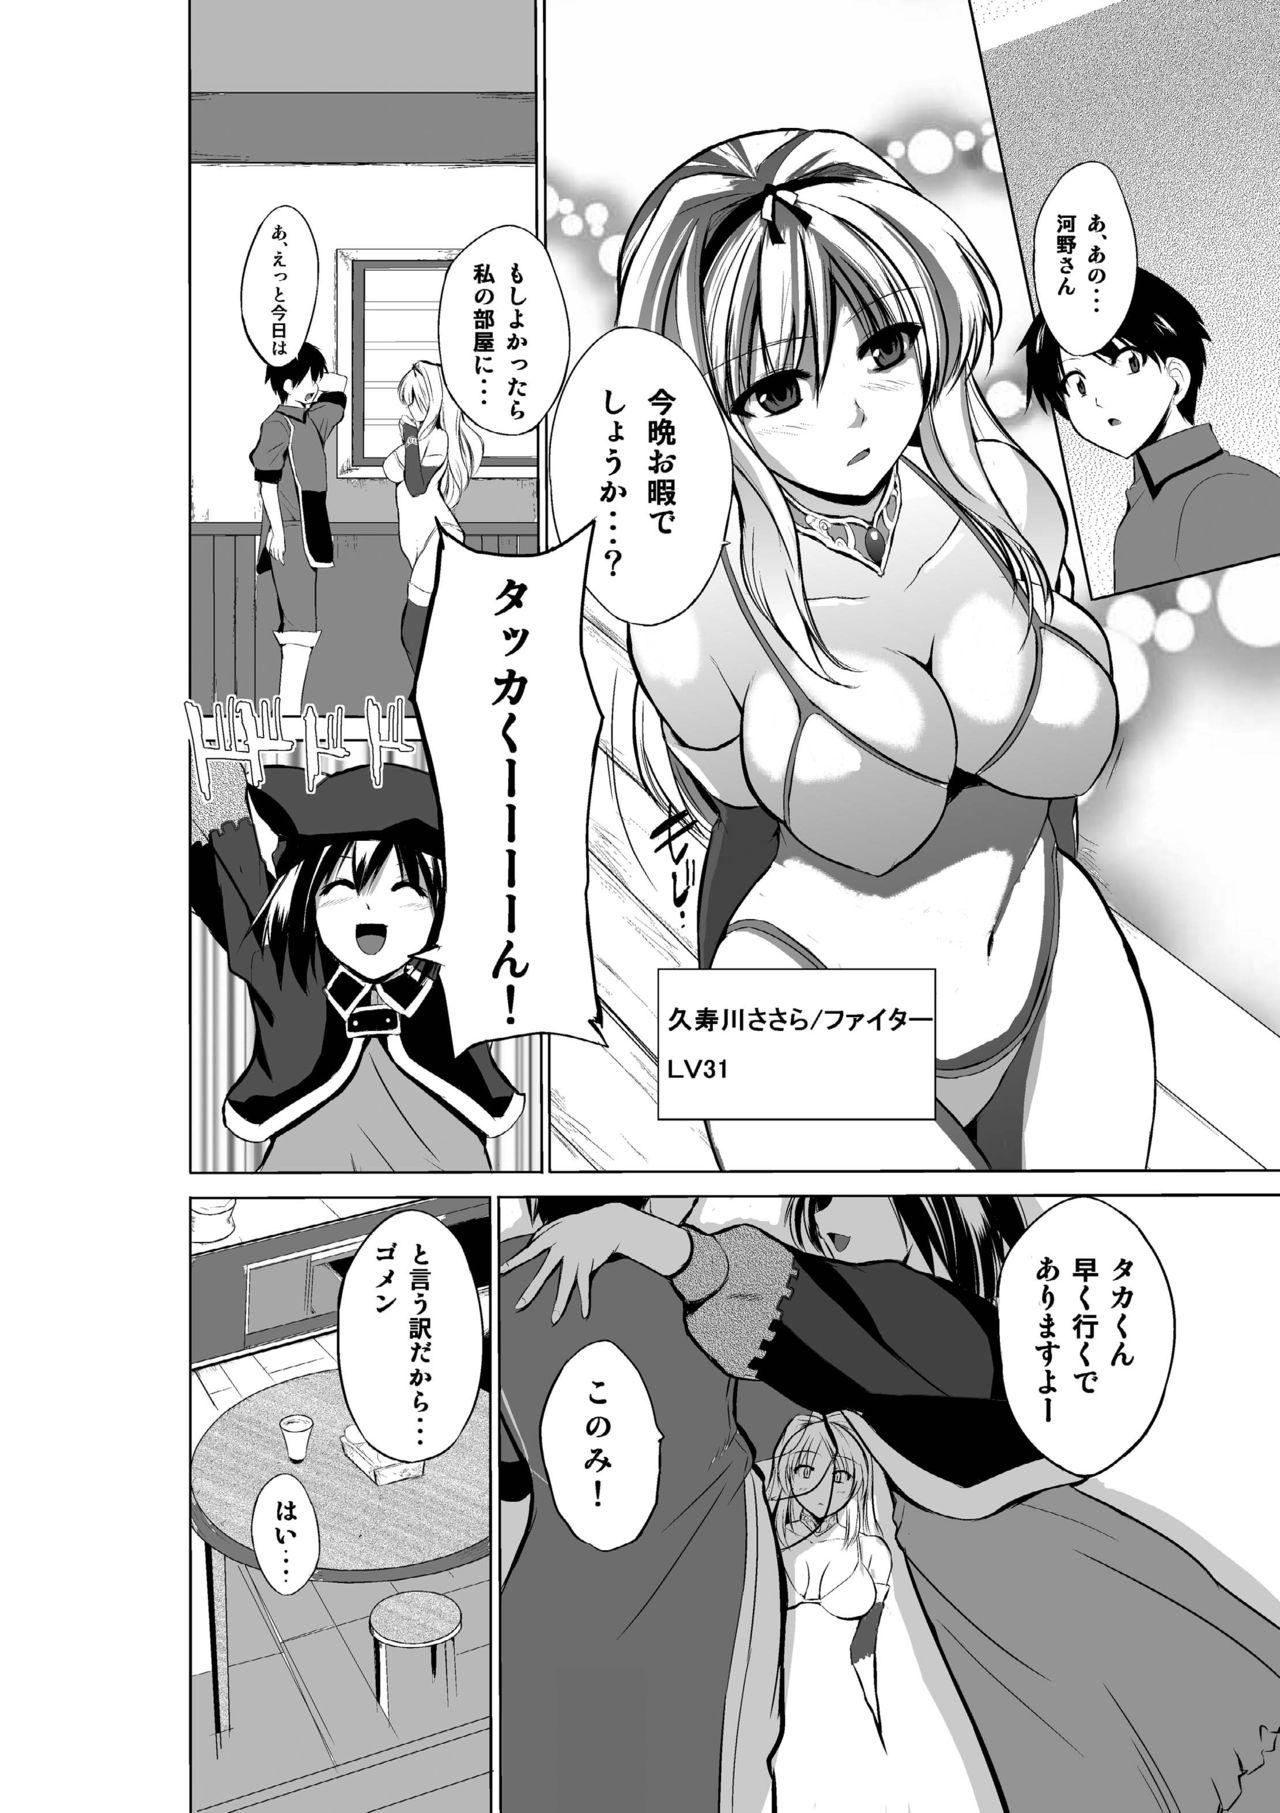 Sesso Dungeon Travelers Soushuuhen - Toheart2 Heels - Page 4